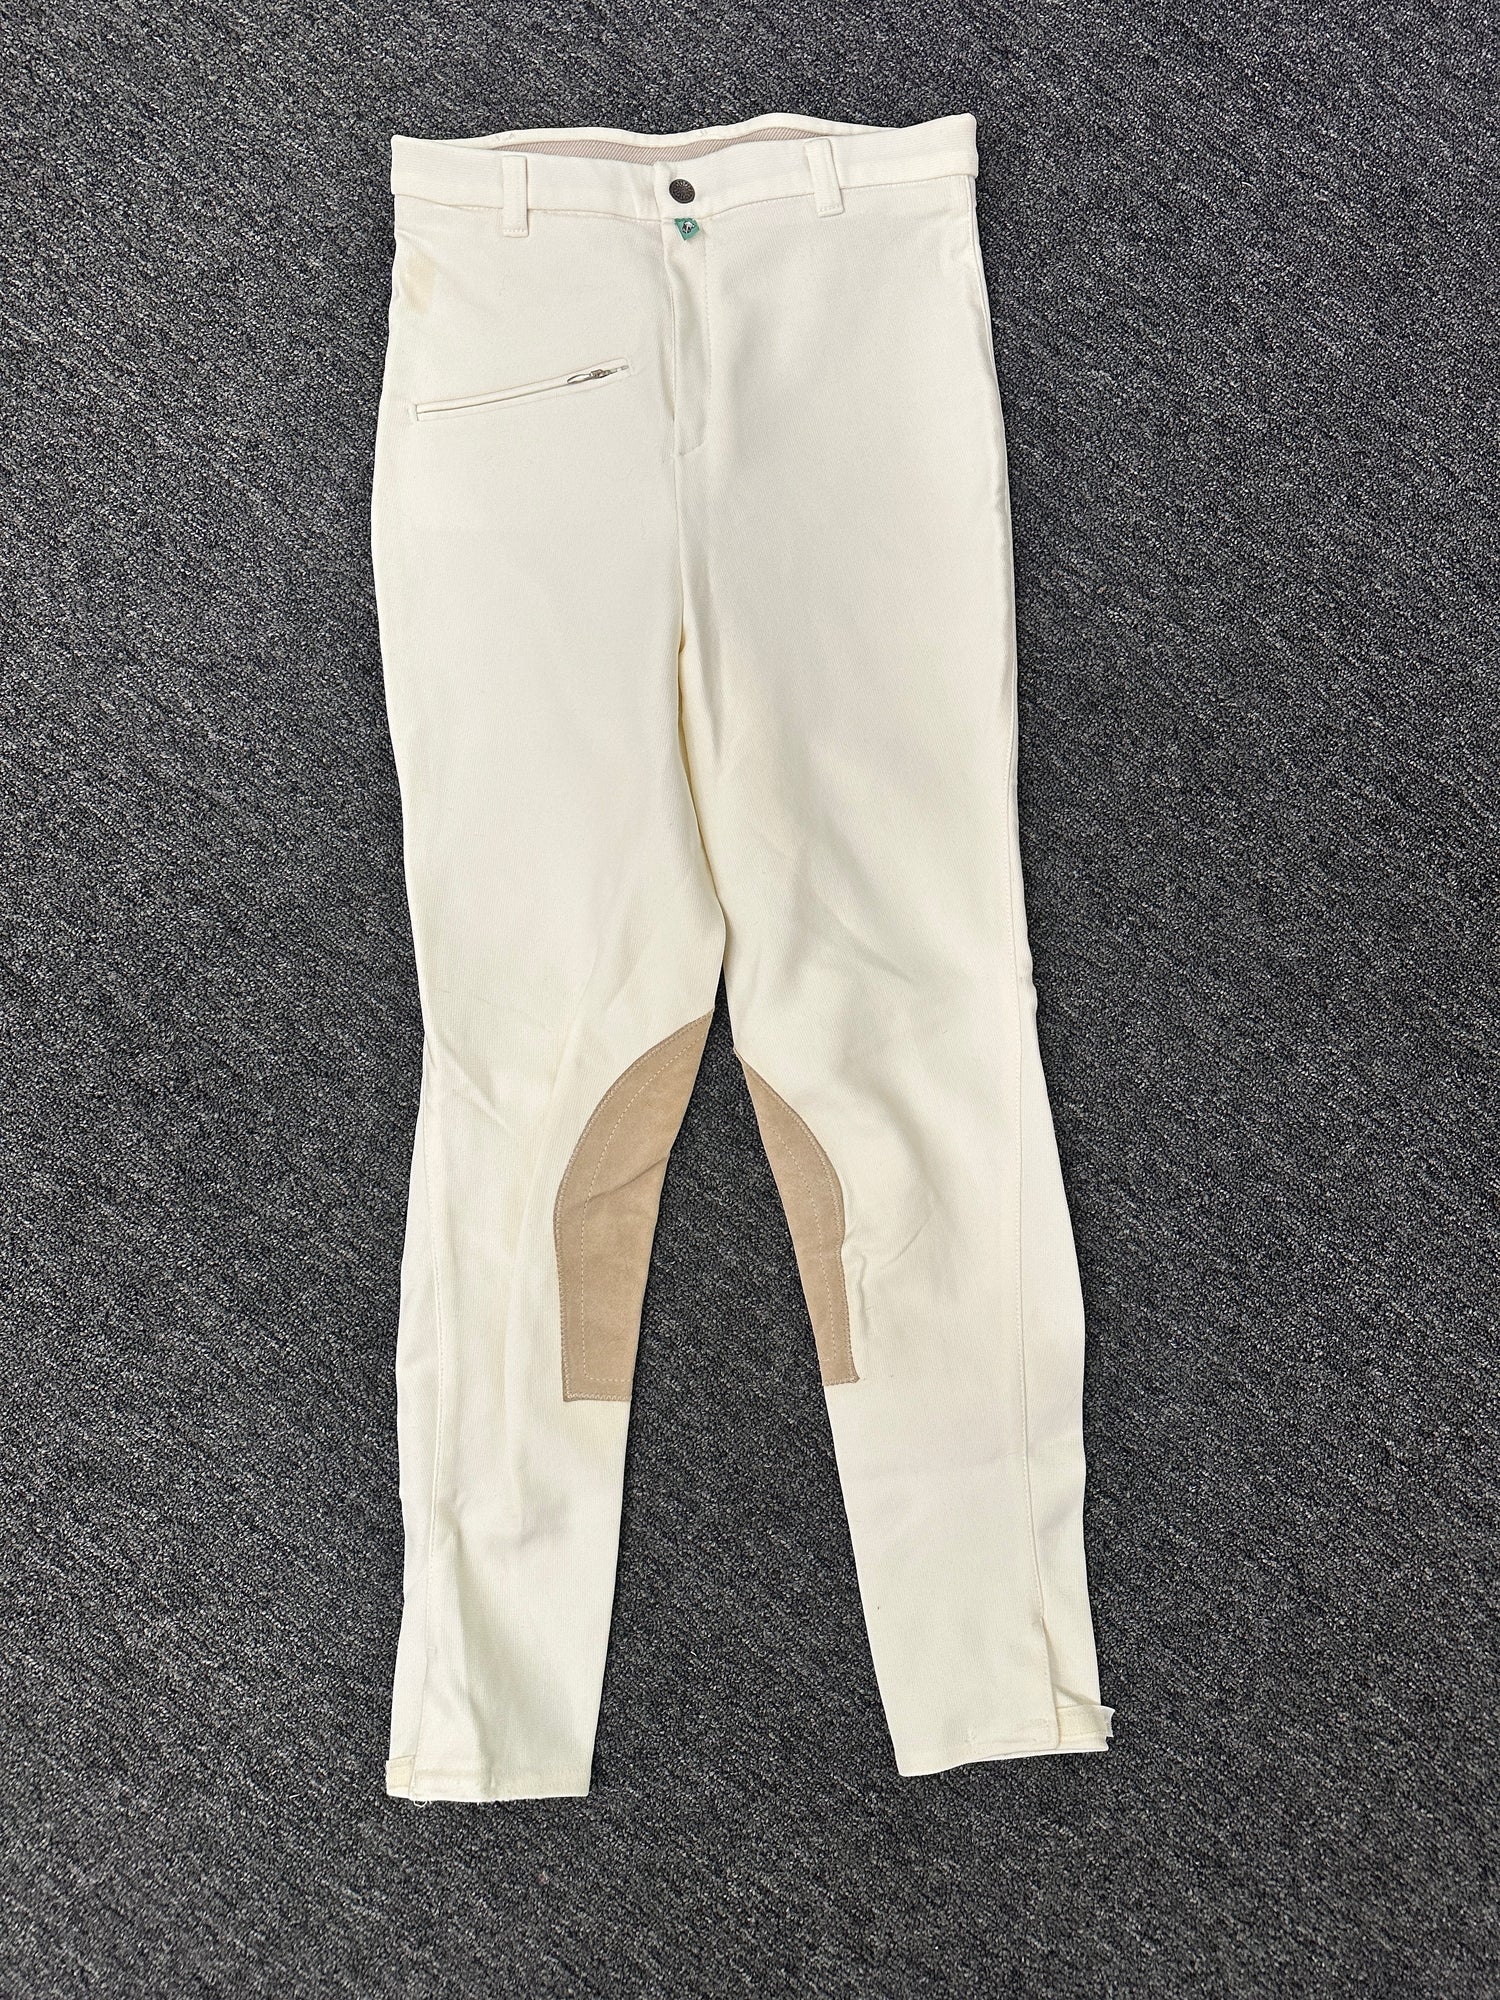 Women's Breeches Assorted - Used in good repair